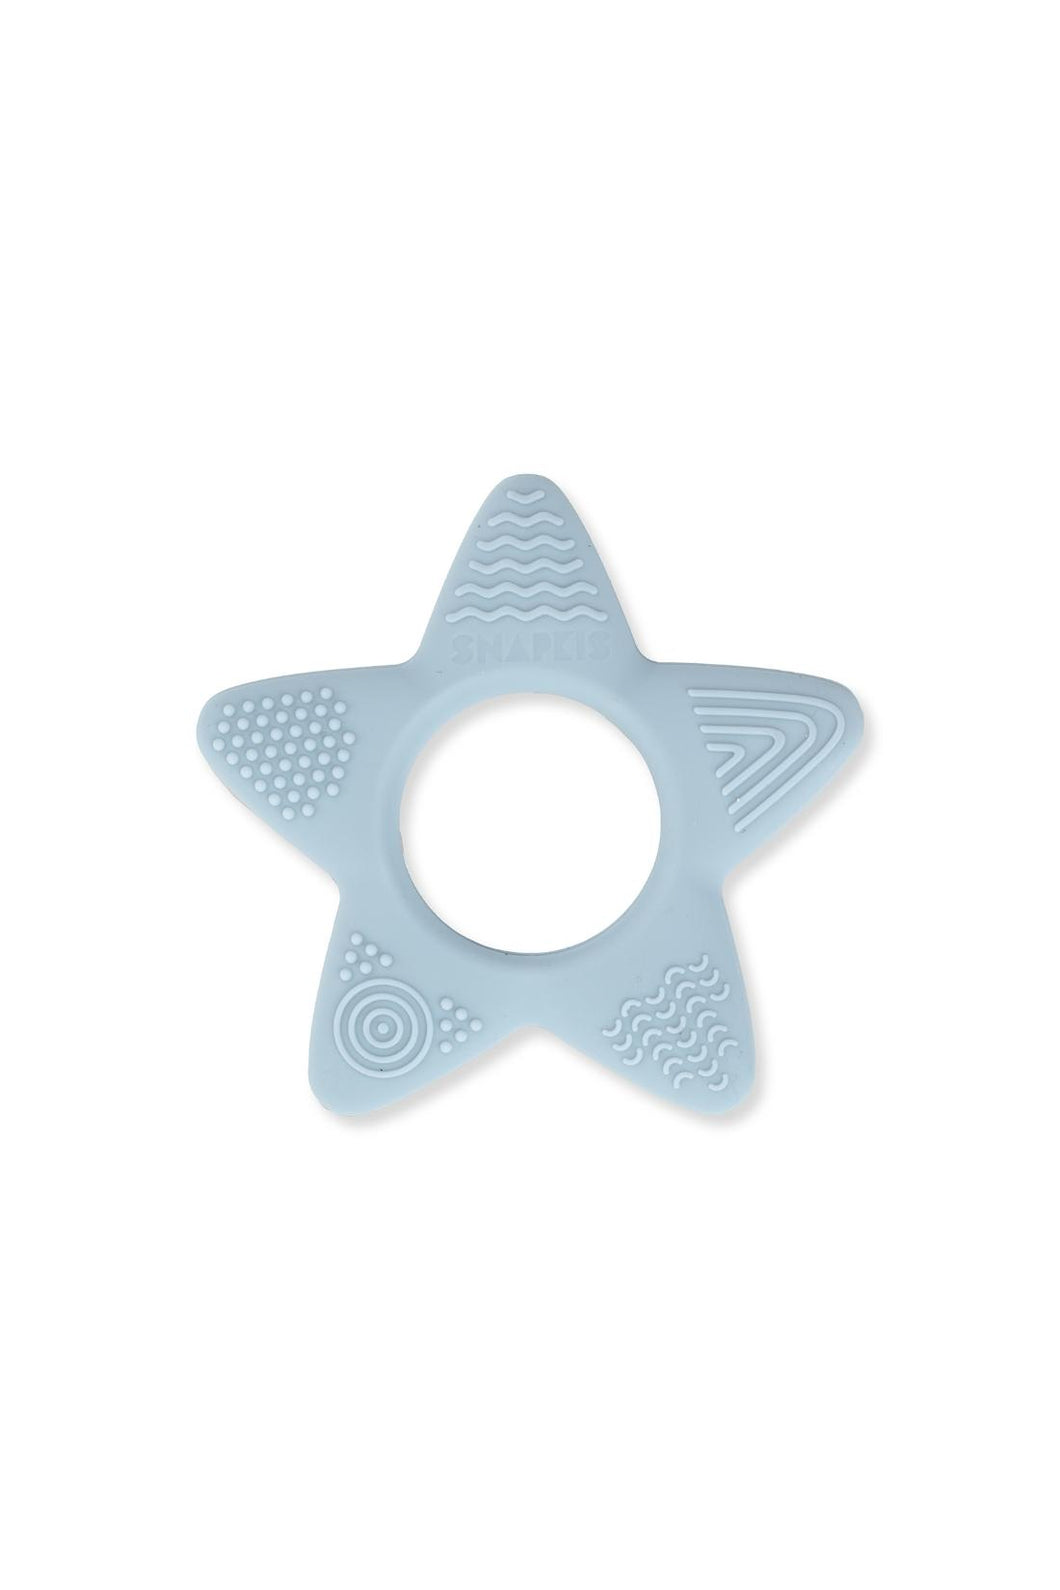 Snapkis Silicone Teether Star